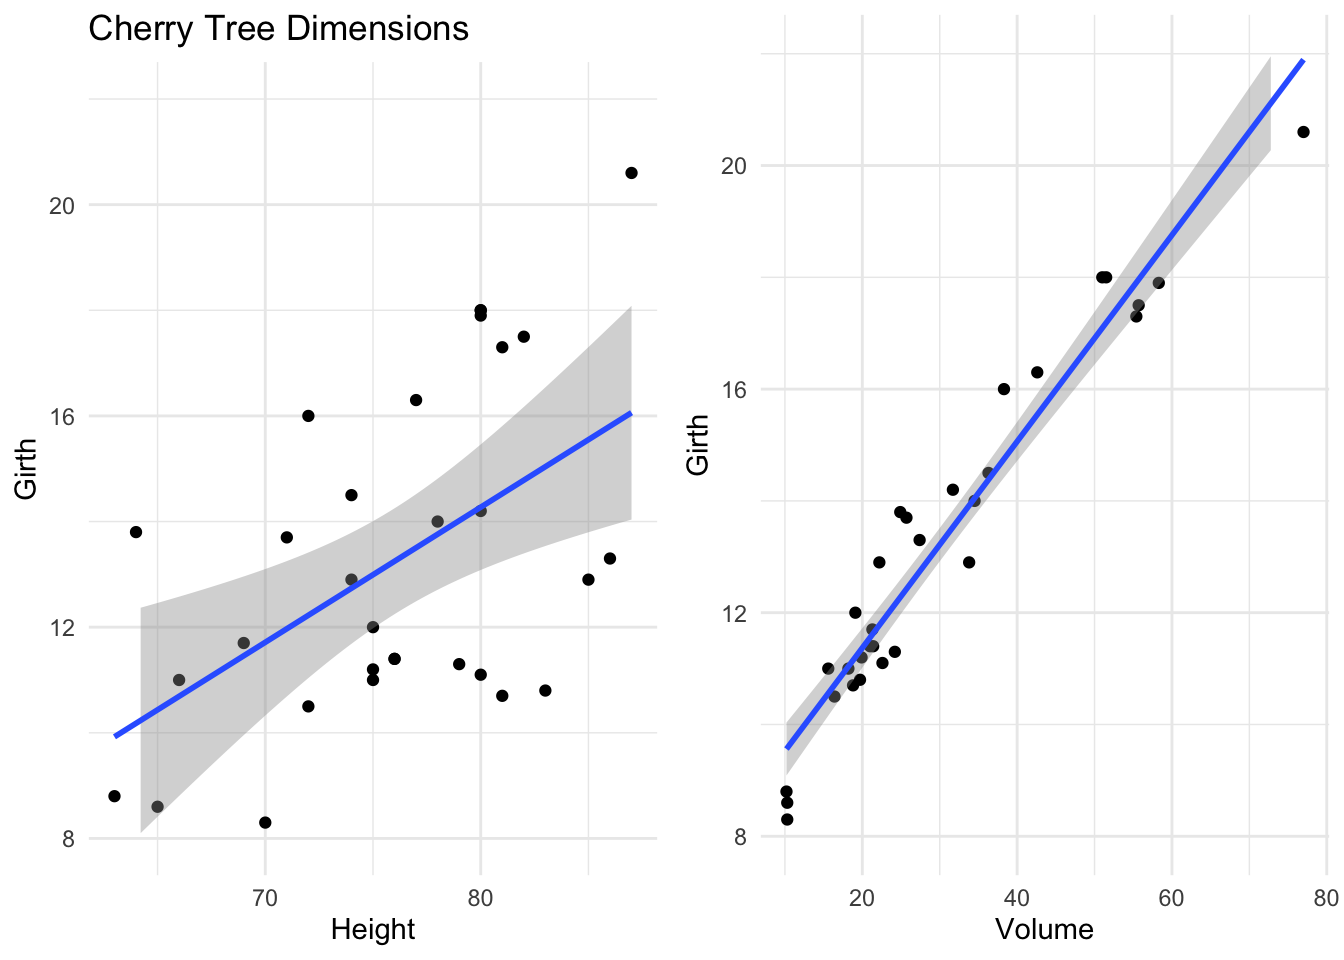 Linear regression models overlaid on data for predicting tree girth as a linear function of either height or volume. Both have positive coefficients.